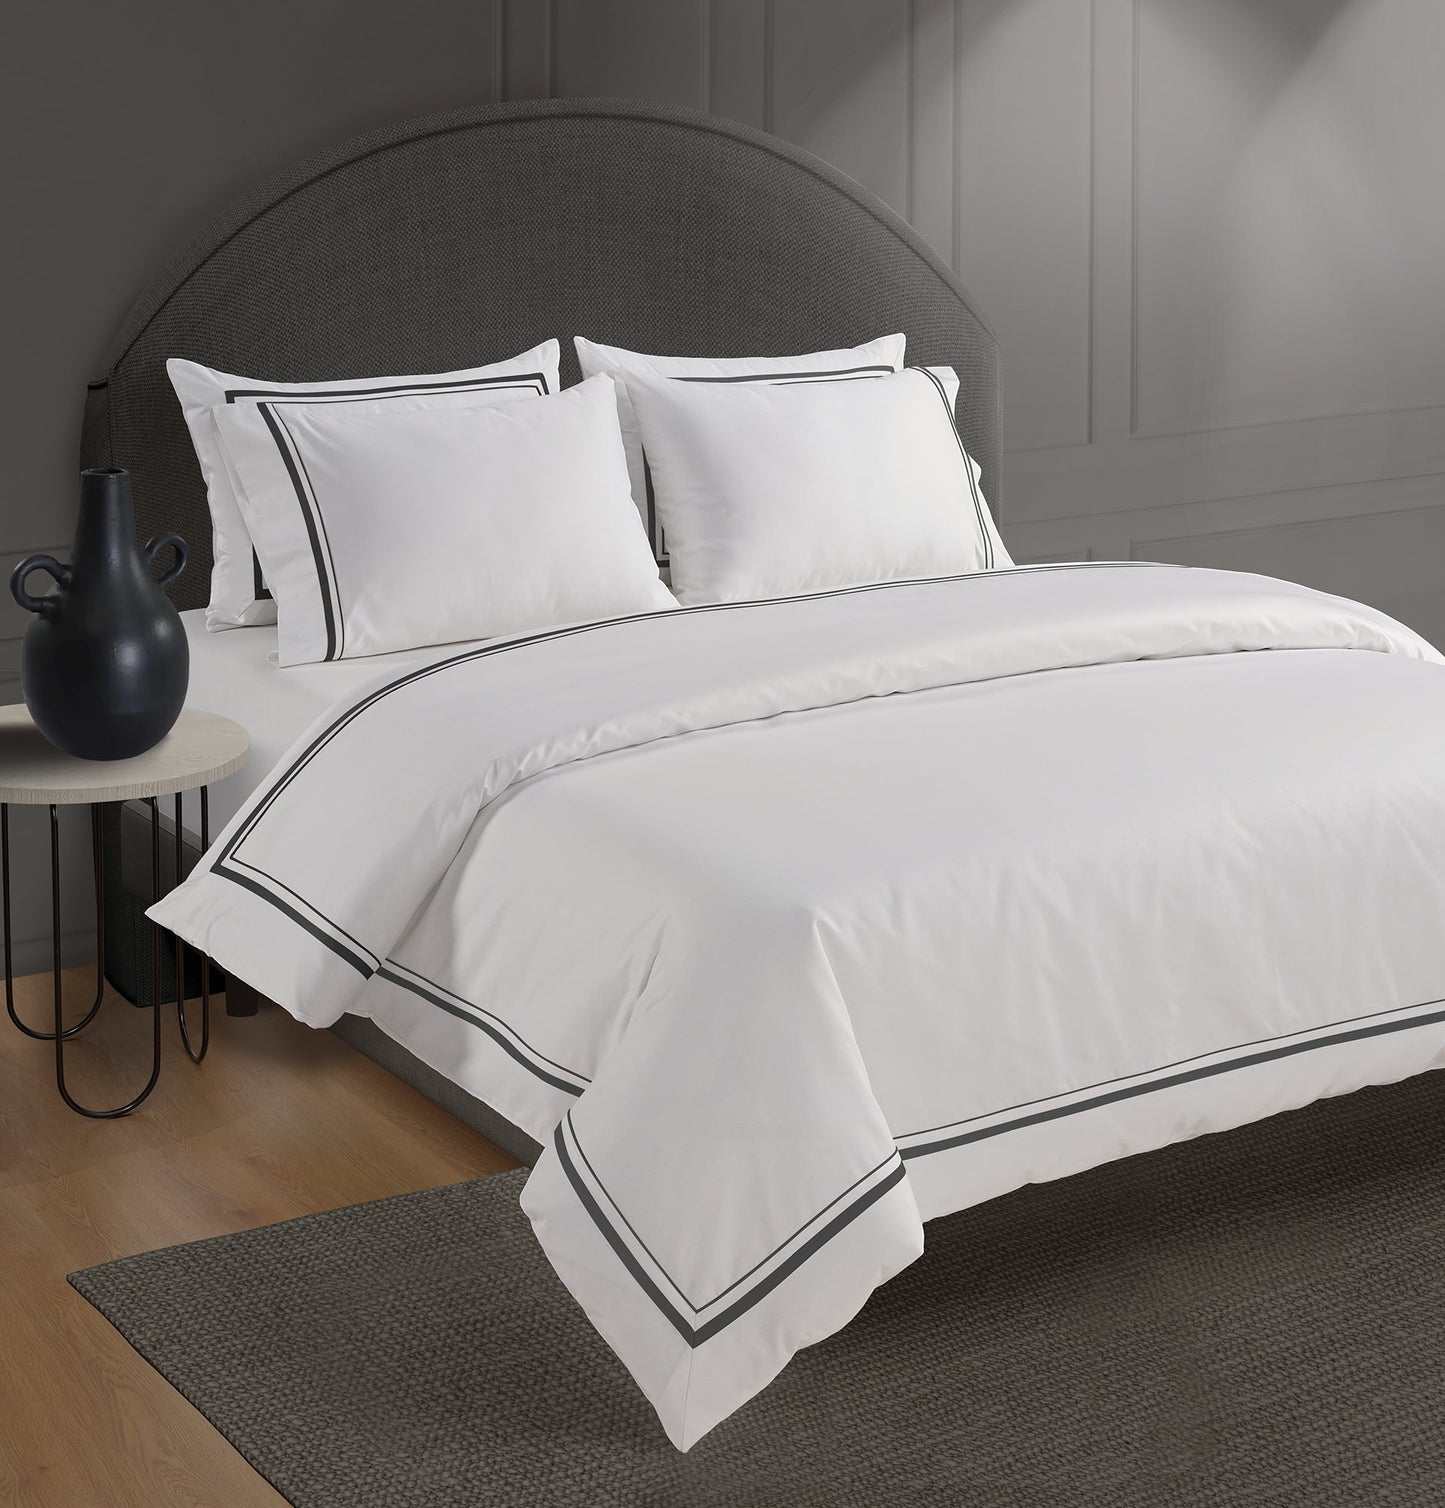 800 Thread Count Egyptian Cotton Royalton Lux Buttery Smooth Duvet Cover - Deep Charcoal